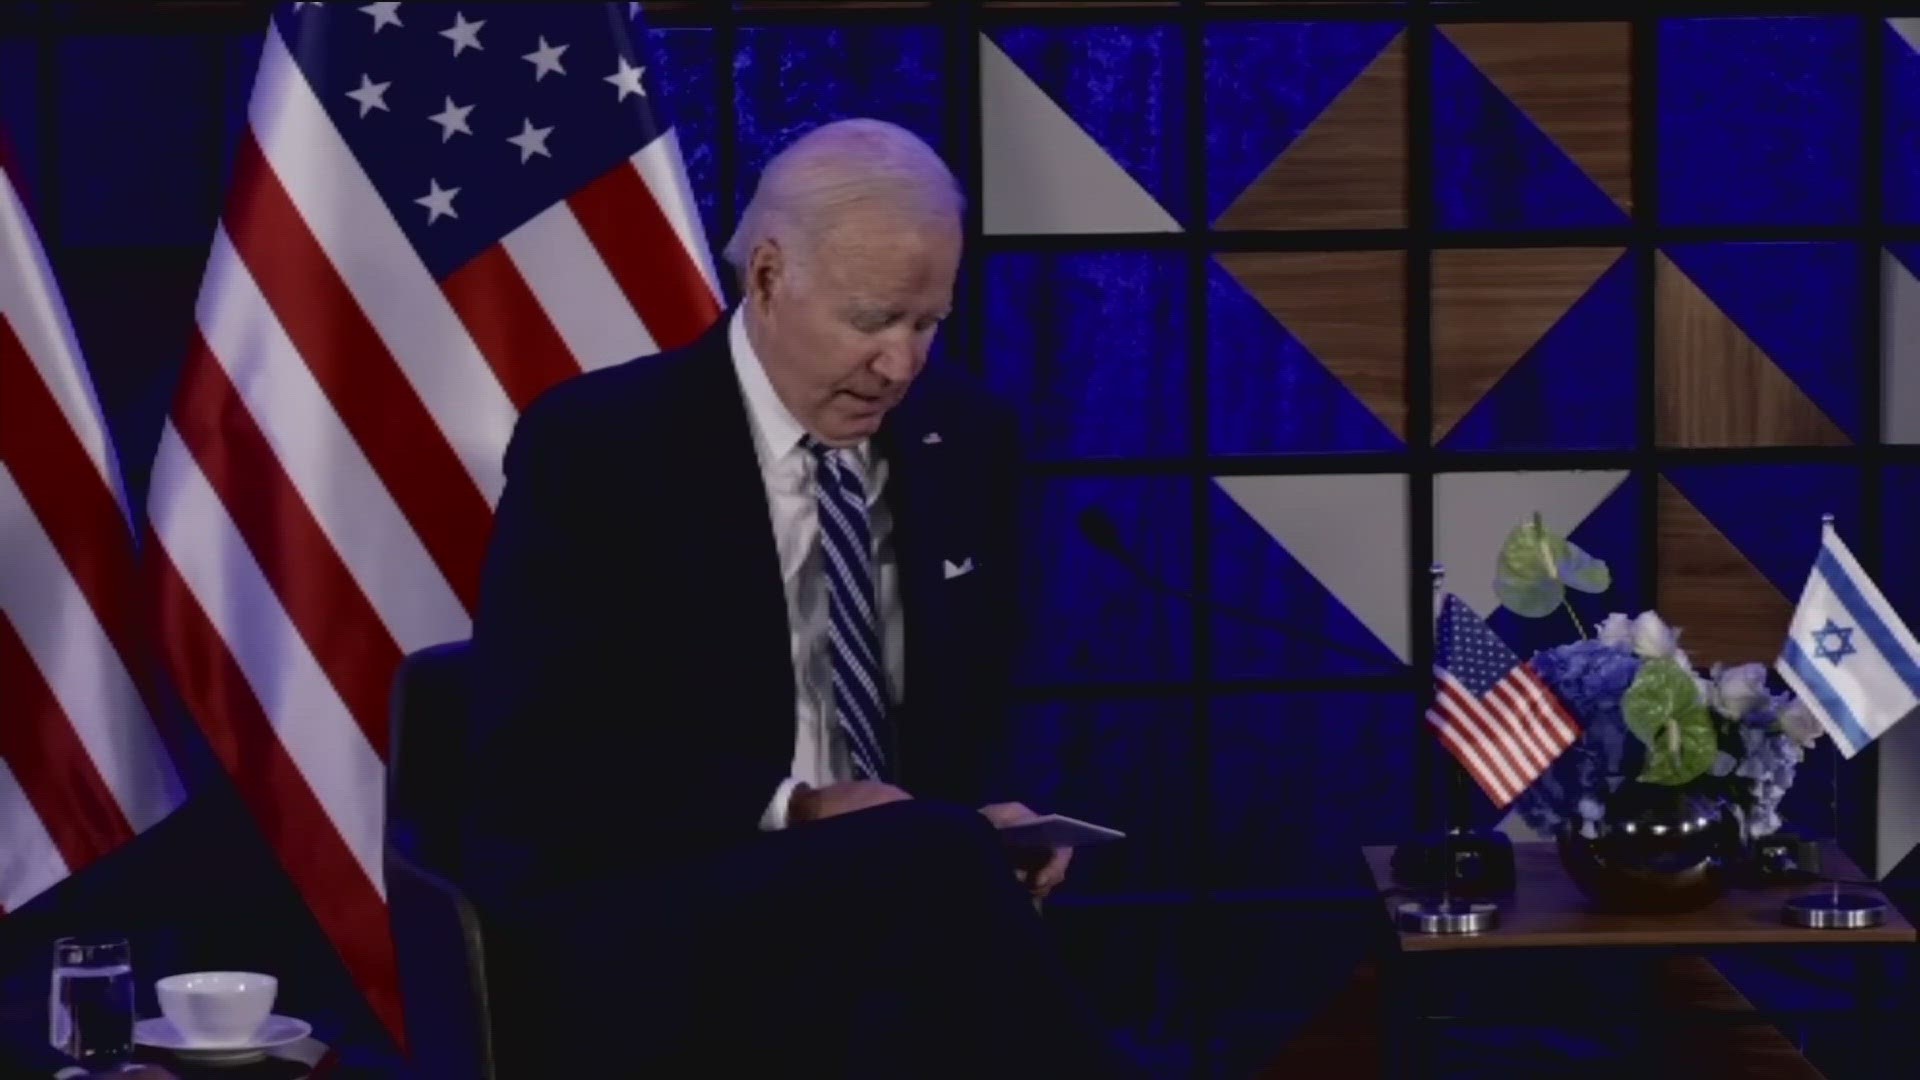 Biden spoke about his support for Israel